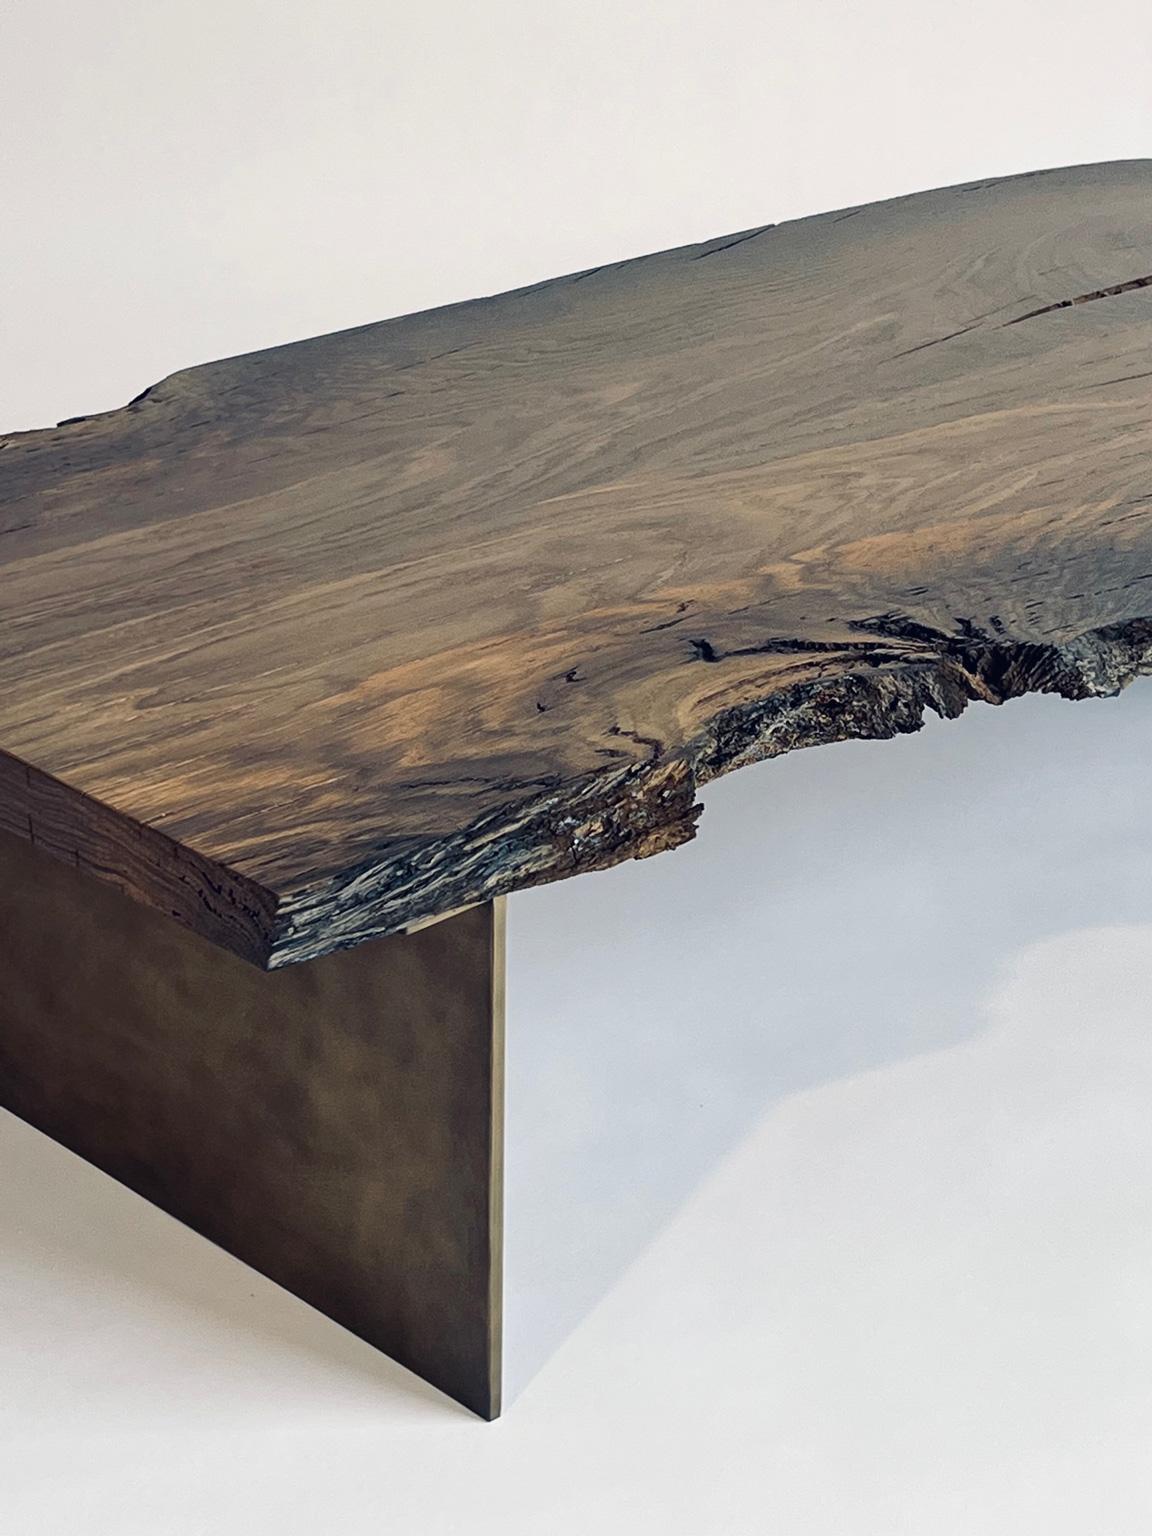 This is a unique coffee table made of Bog Oak, which is approximately 7,000 years old. The wood originates from Romania and has been buried underground for around 7,000 years. It remains intact due to being sealed off from oxygen, preventing decay.